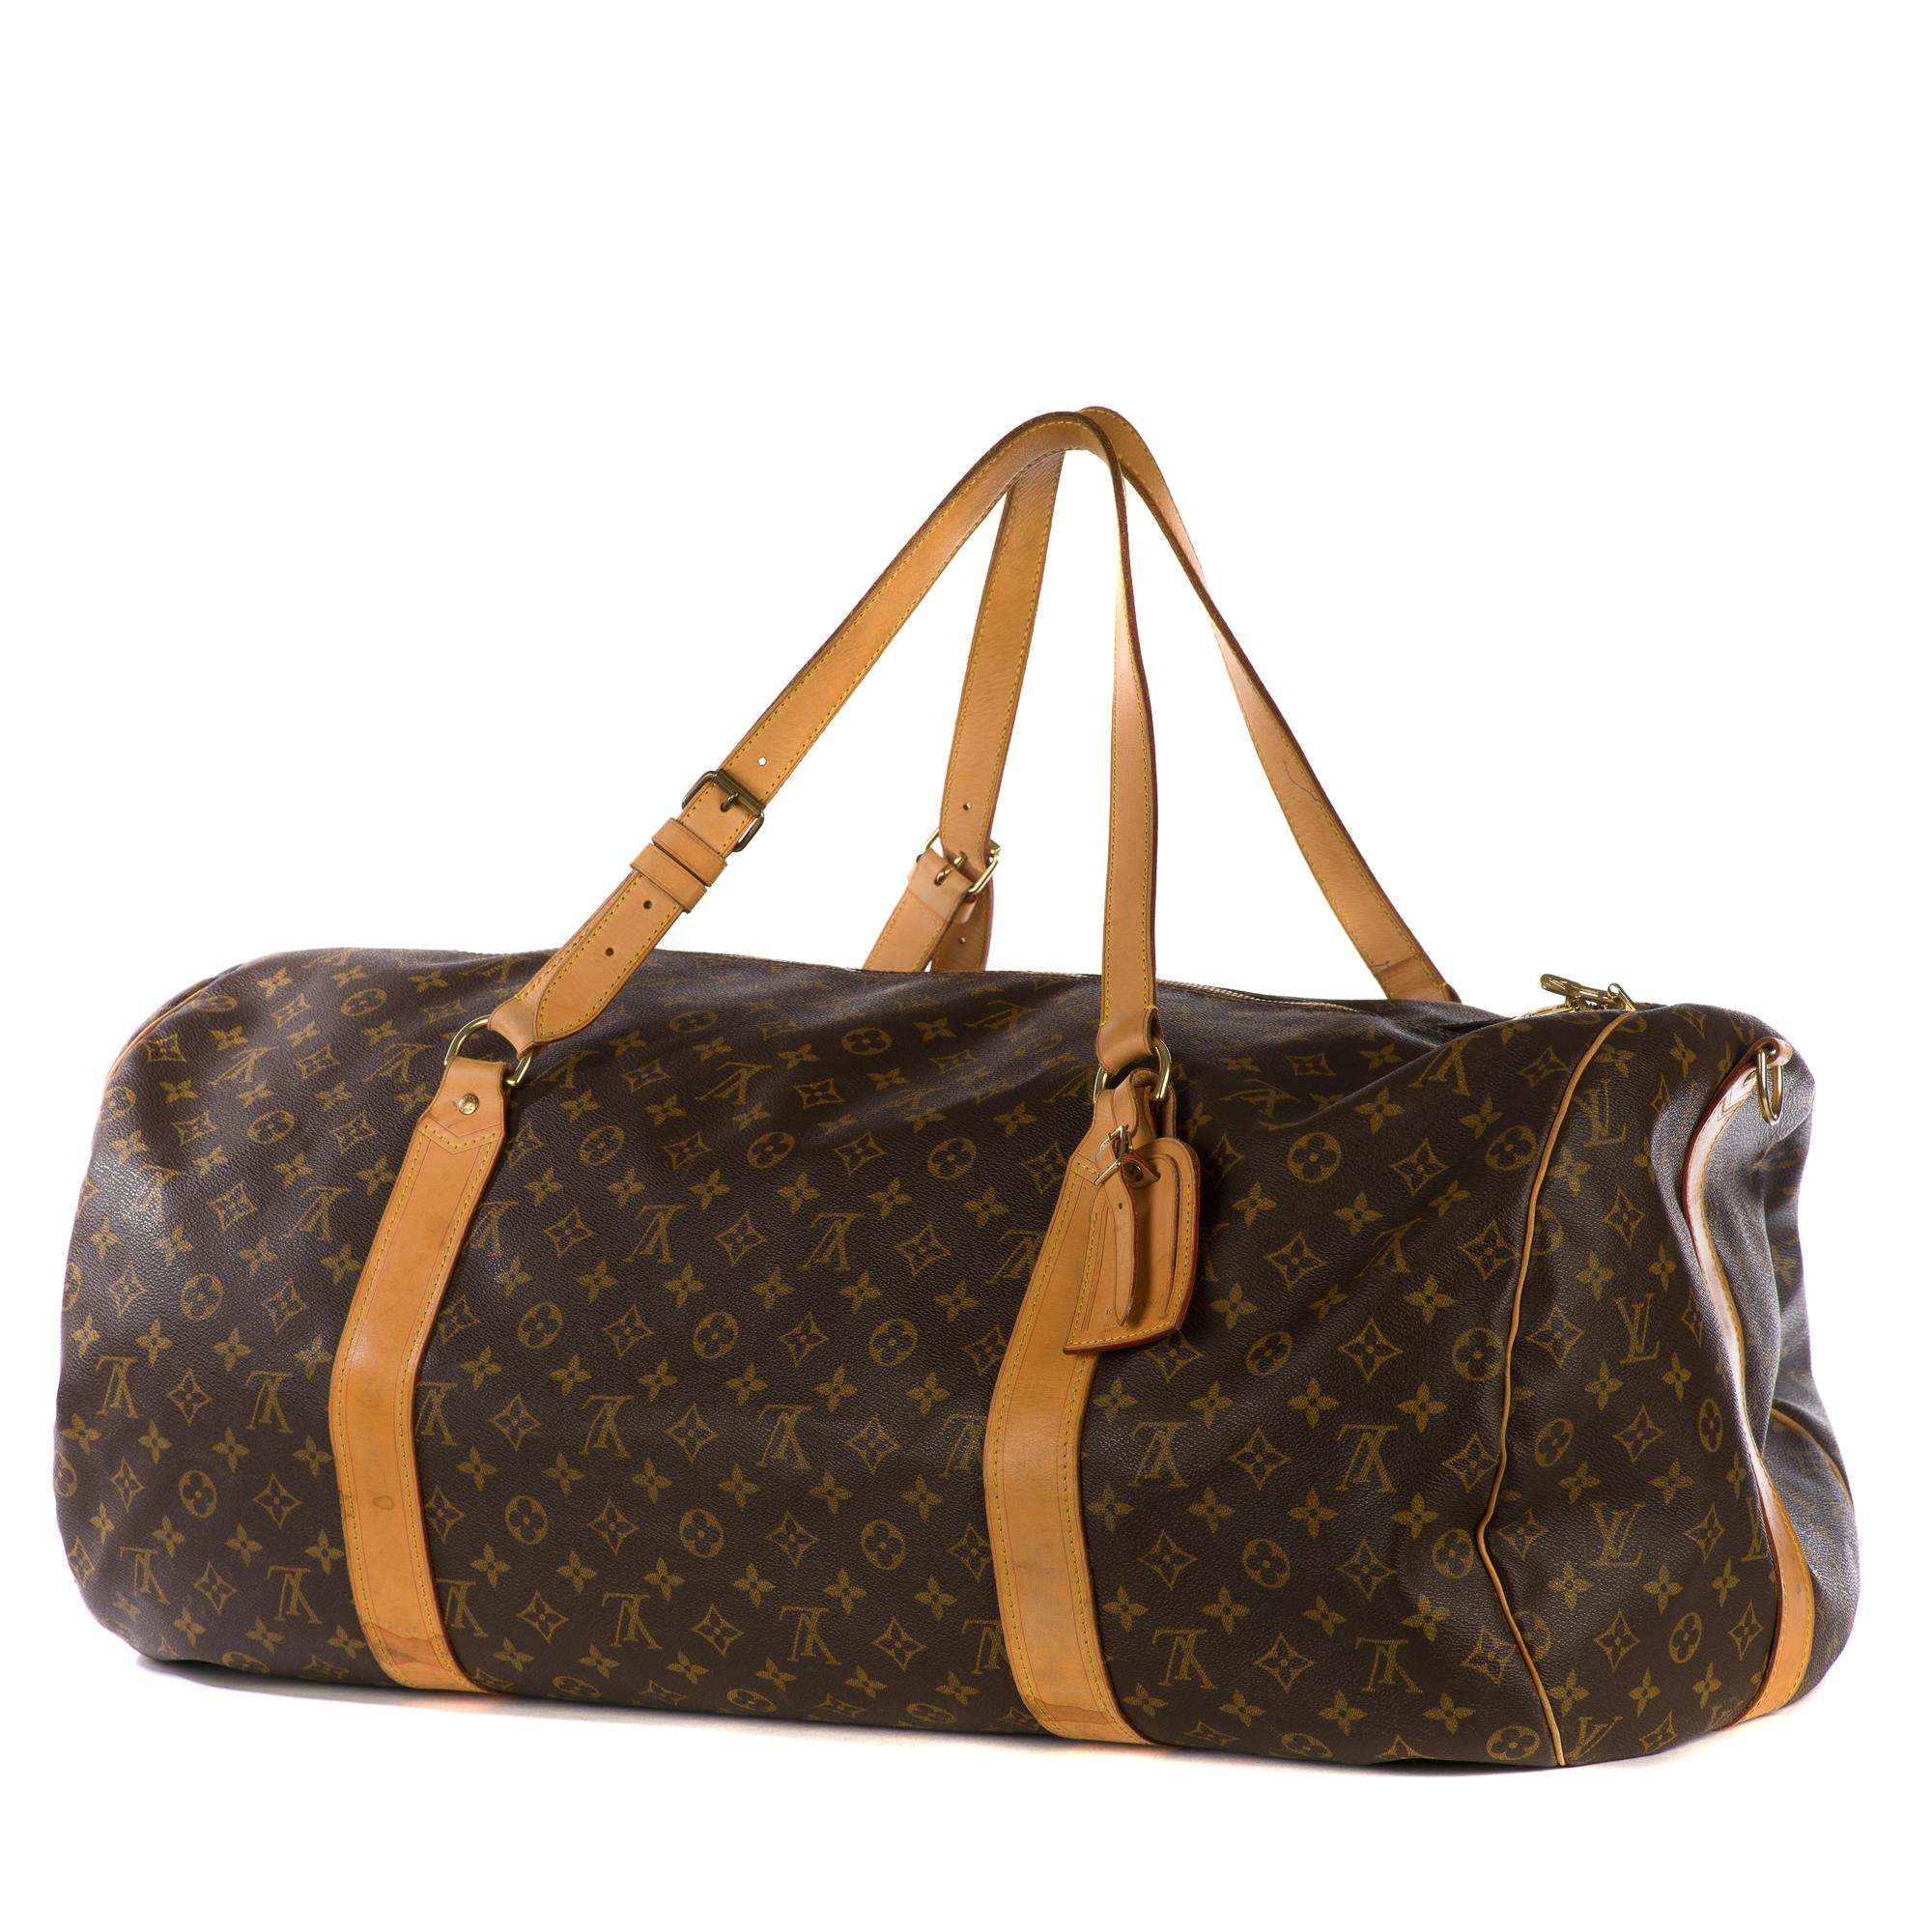 Exceptional and rare Louis Vuitton travel bag 